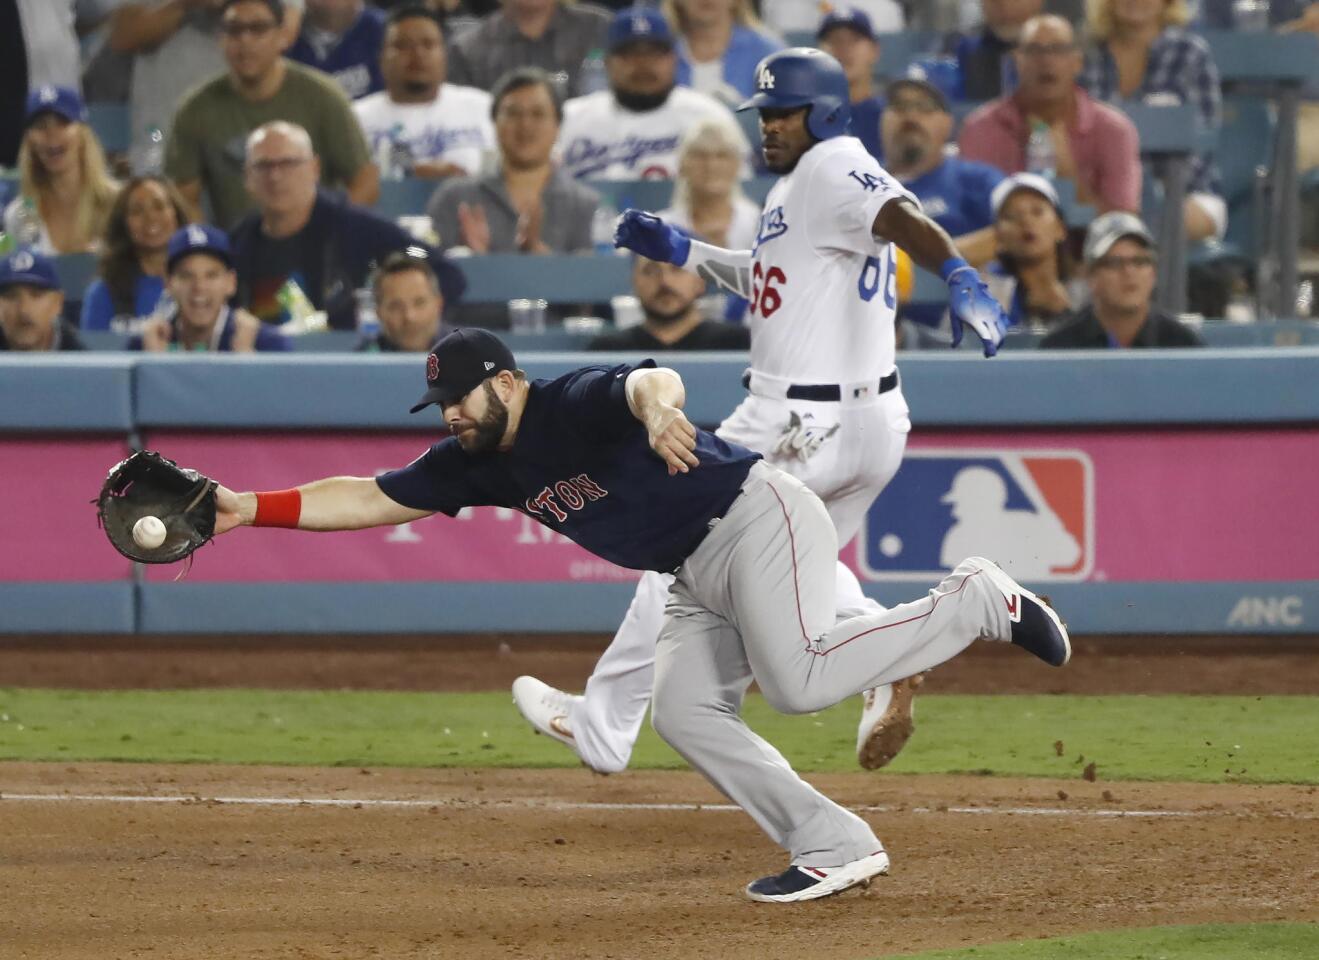 MCX01. Los Angeles (United States), 26/10/2018.- Boston Red Sox first baseman Mitch Moreland (L) comes off the bag to catch an errant throw on an infield single by Los Angeles Dodgers batter Yasiel Puig in the bottom of the seventh inning of game three of the World Series at Dodger Stadium in Los Angeles, California, USA, 26 October 2018. The Red Sox lead the best-of-seven series 2-0 to determine the champion of Major League Baseball. (Estados Unidos) EFE/EPA/JOHN G. MABANGLO ** Usable by HOY and SD Only **